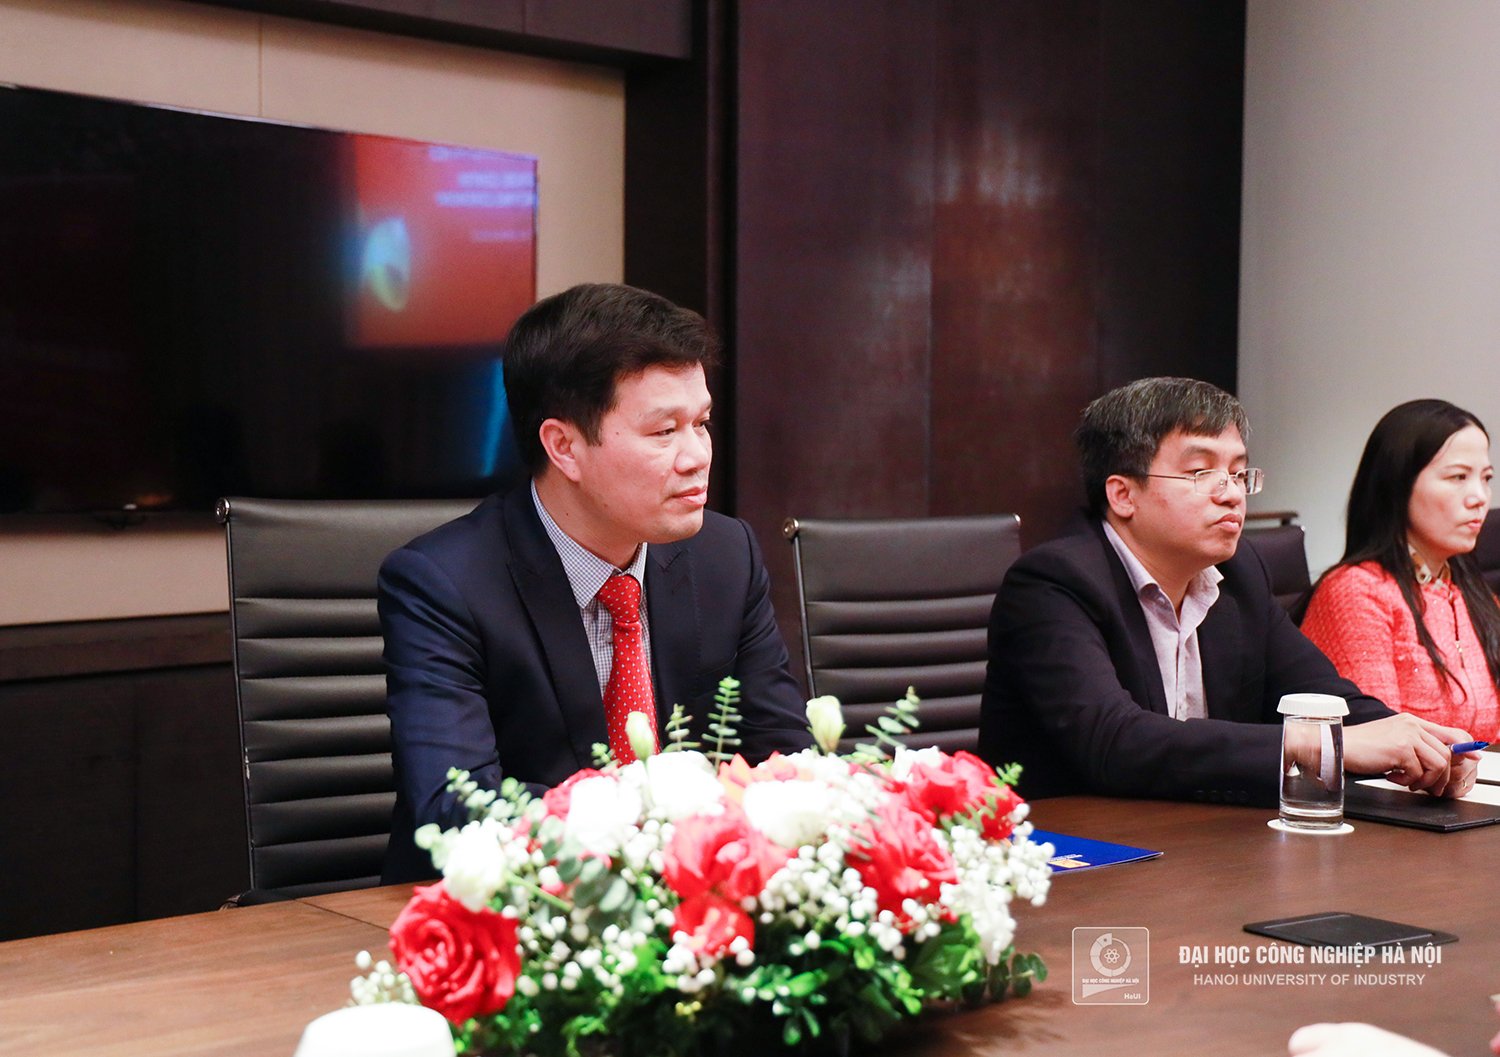 The Grand Opening of ACCA Computer-Based Exam Center at Hanoi University of Industry